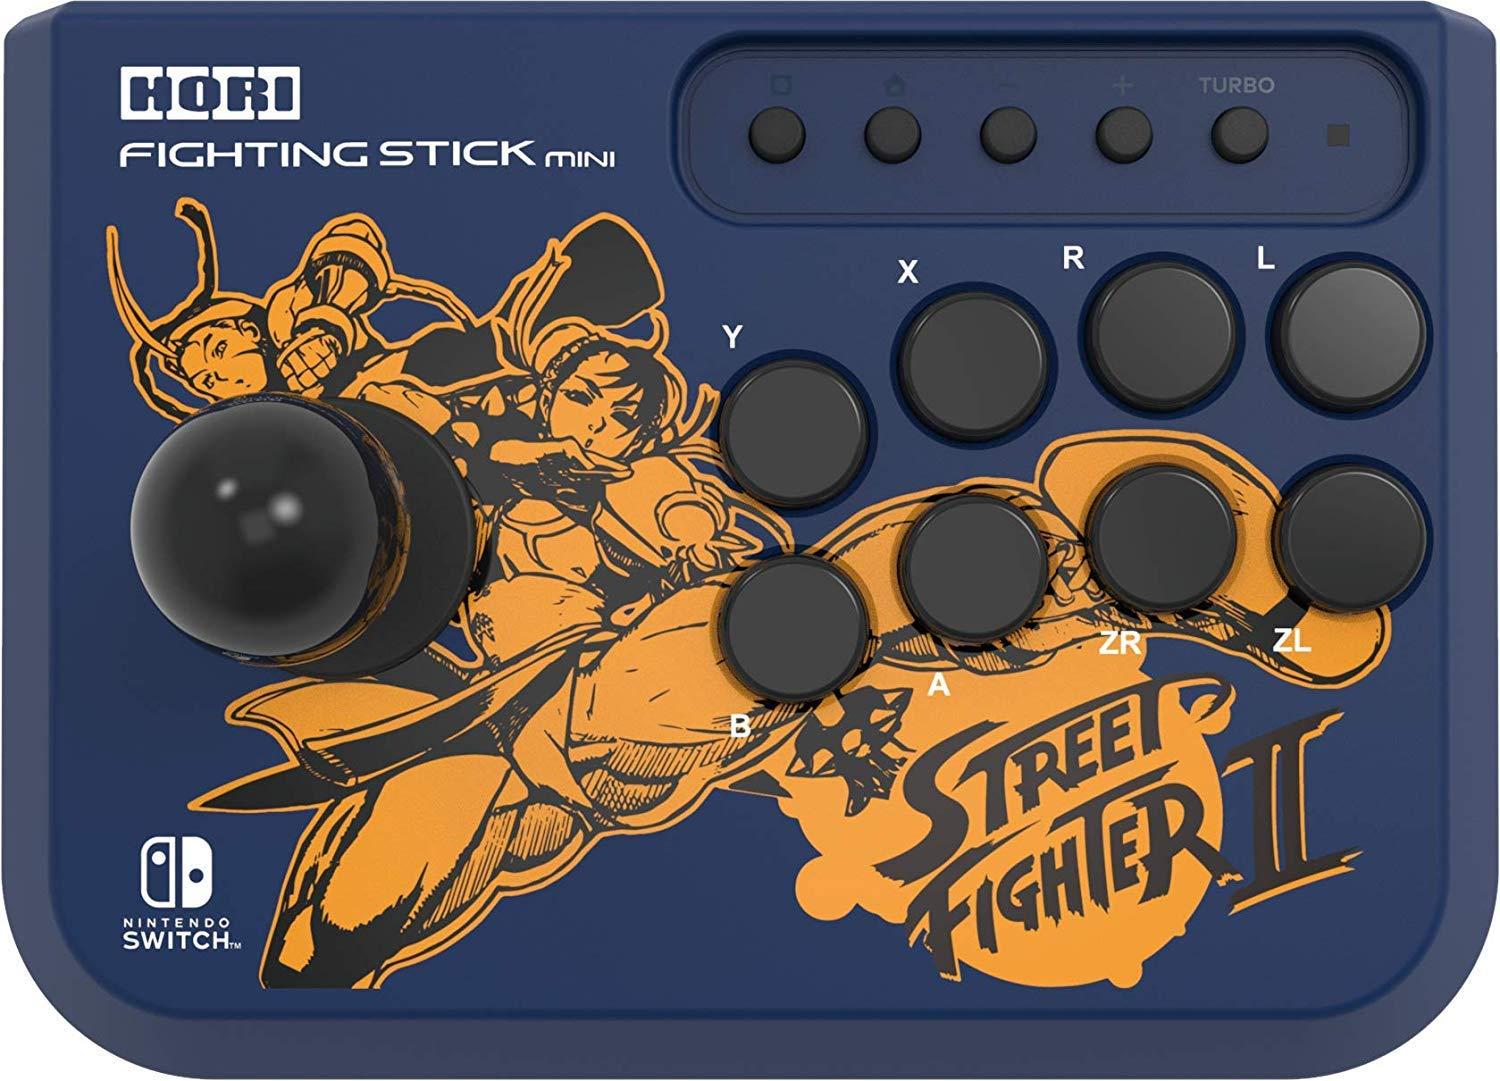 Hori Nintendo Switch Street Fighter II Edition Fighting Stick Mini for $52.97 Shipped